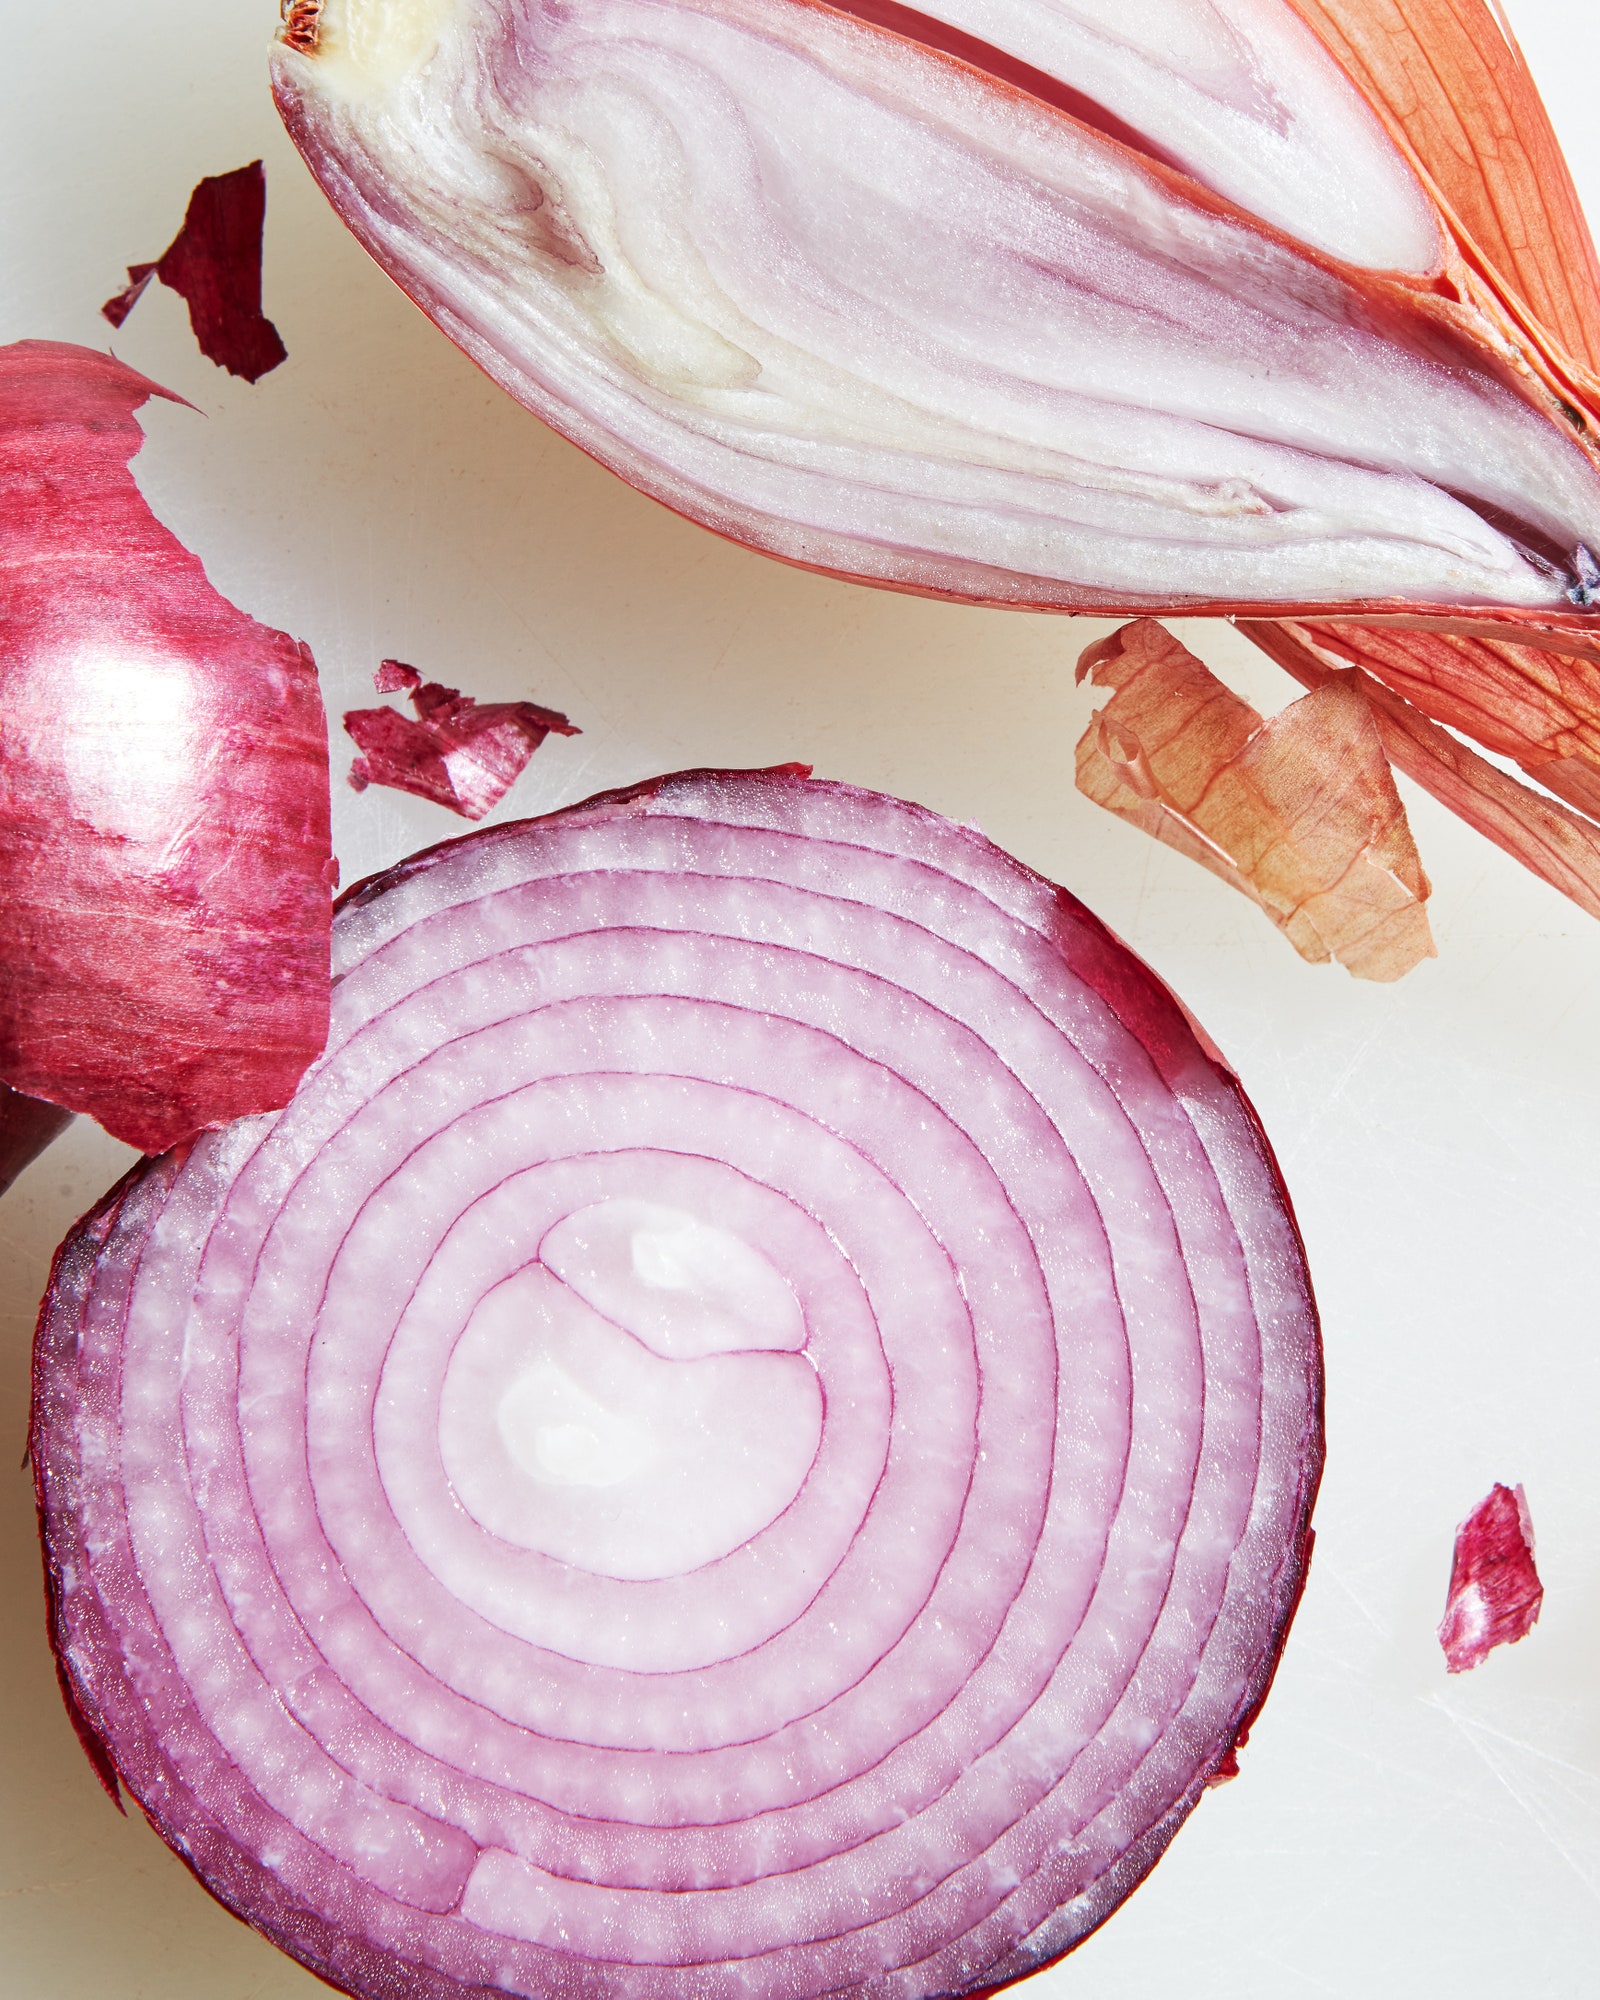 Crosssections of a cut red onion and a shallot.